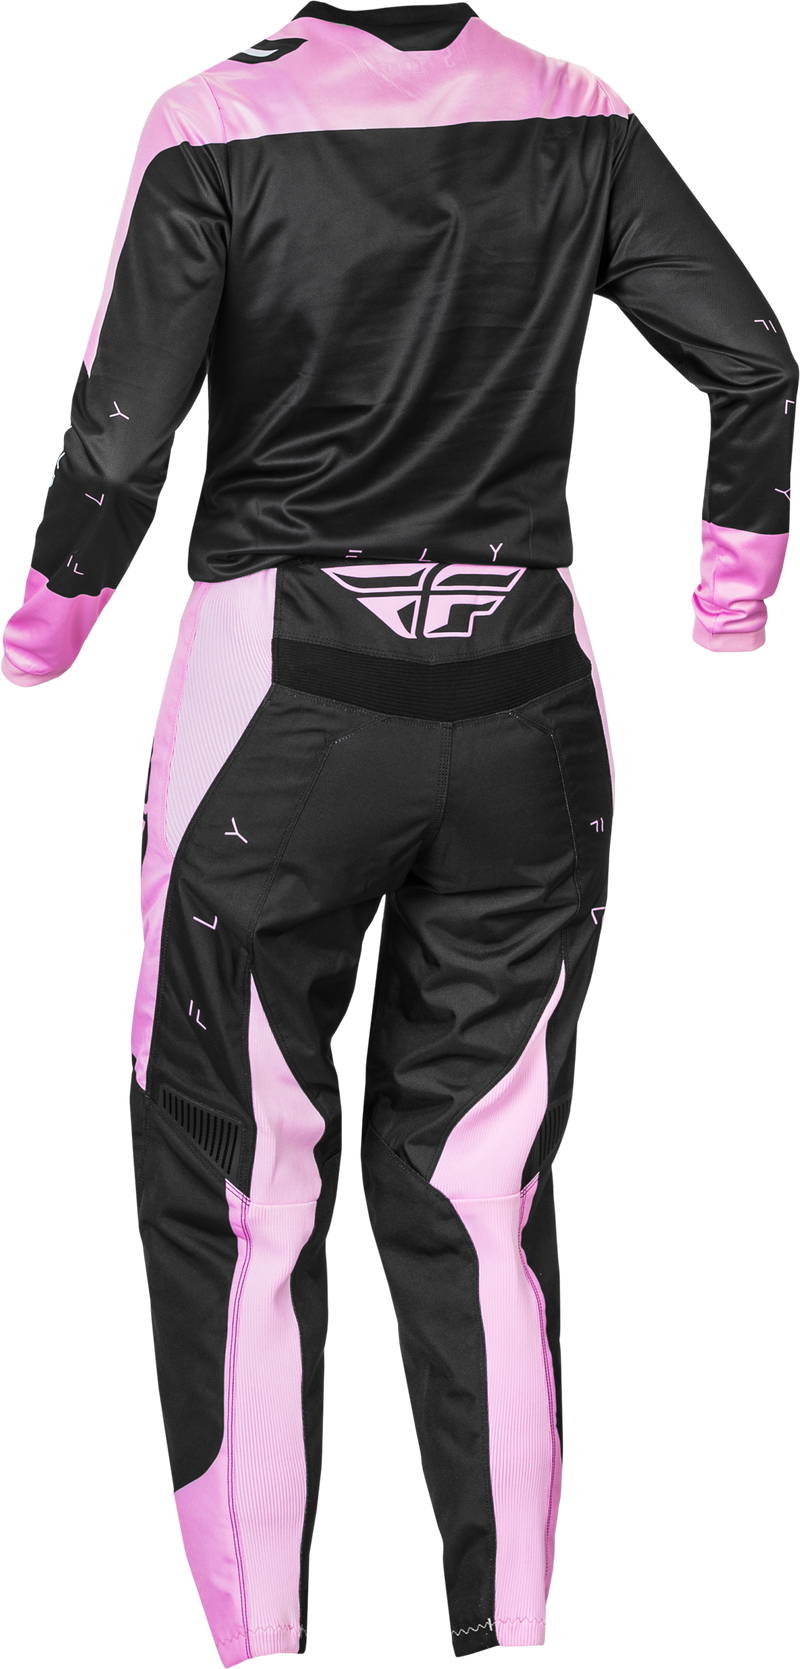 Fly Racing Women's F-16 Moto Gear Set - Pant and Jersey Combo